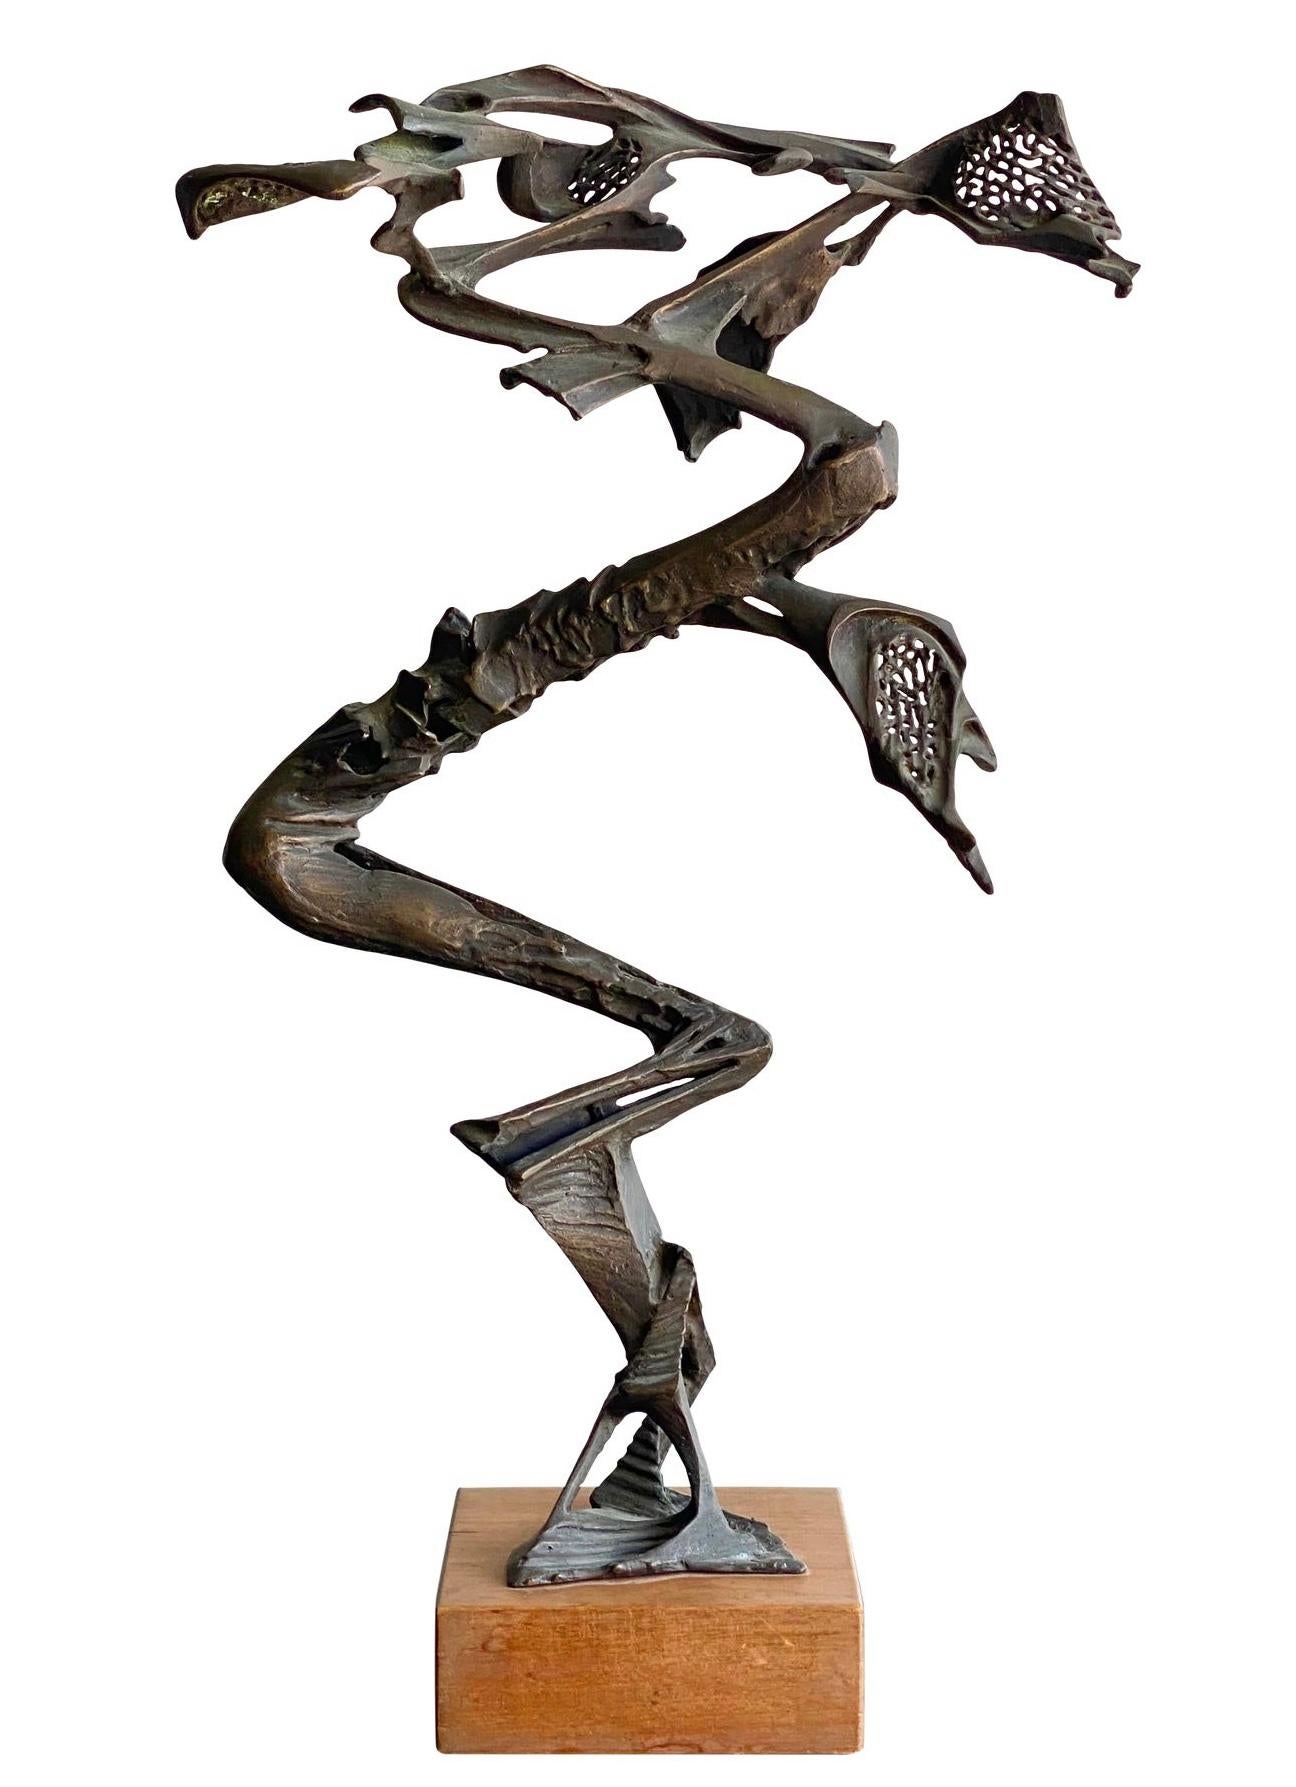 Exceptional midcentury bronze abstract sculpture. Signed Robert Cook with additional hand written marks on the bottom of the plinth. Striking Brutalist design. Acquired from a Palm Beach estate.